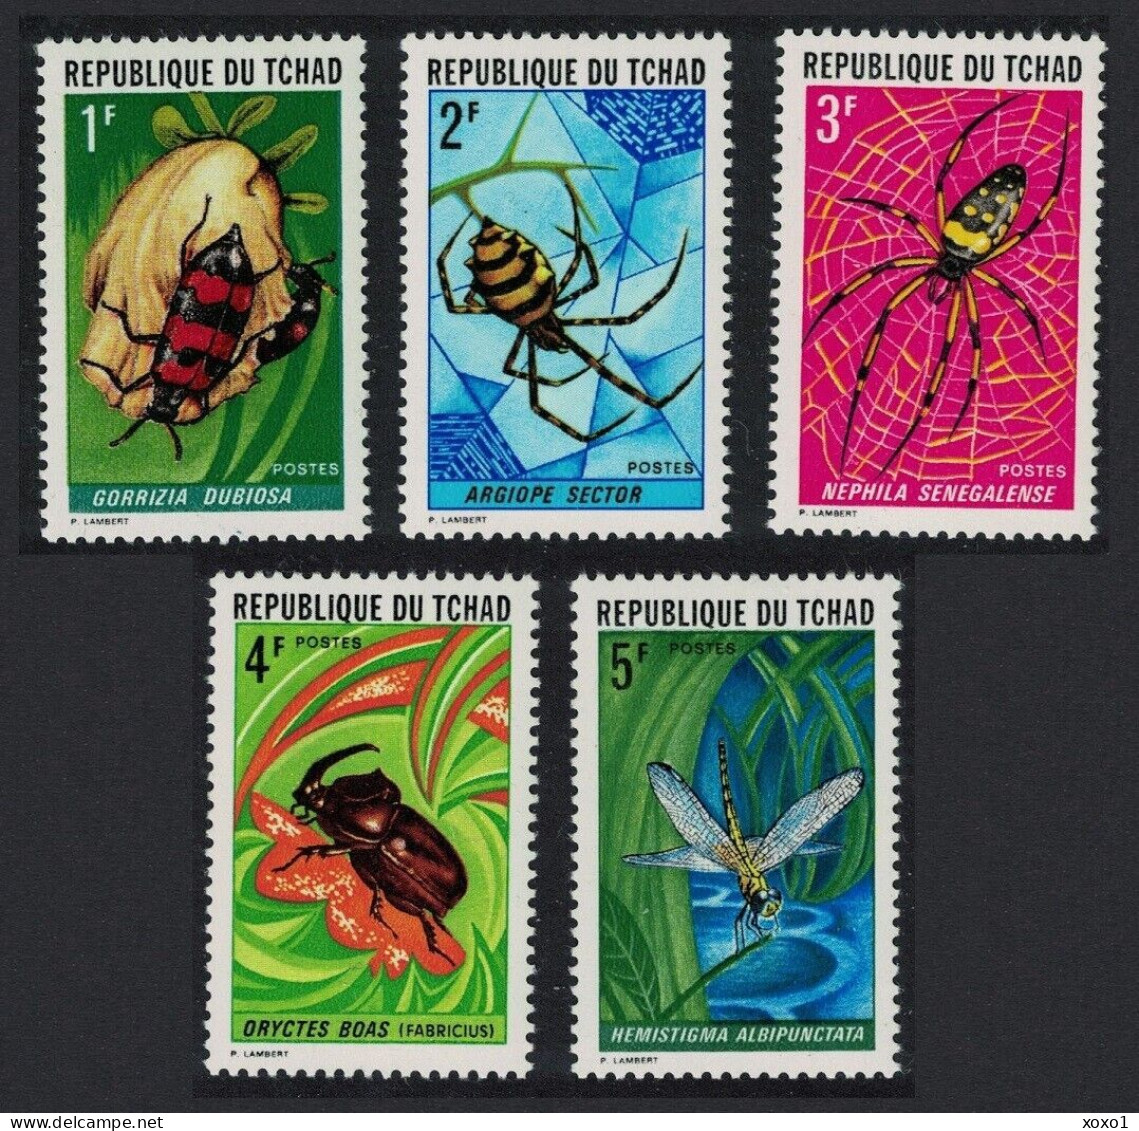 Chad 1972 MiNr. 510 - 514  Tschad Insects Spiders Bugs 5v MNH** 16,00 € - Araignées